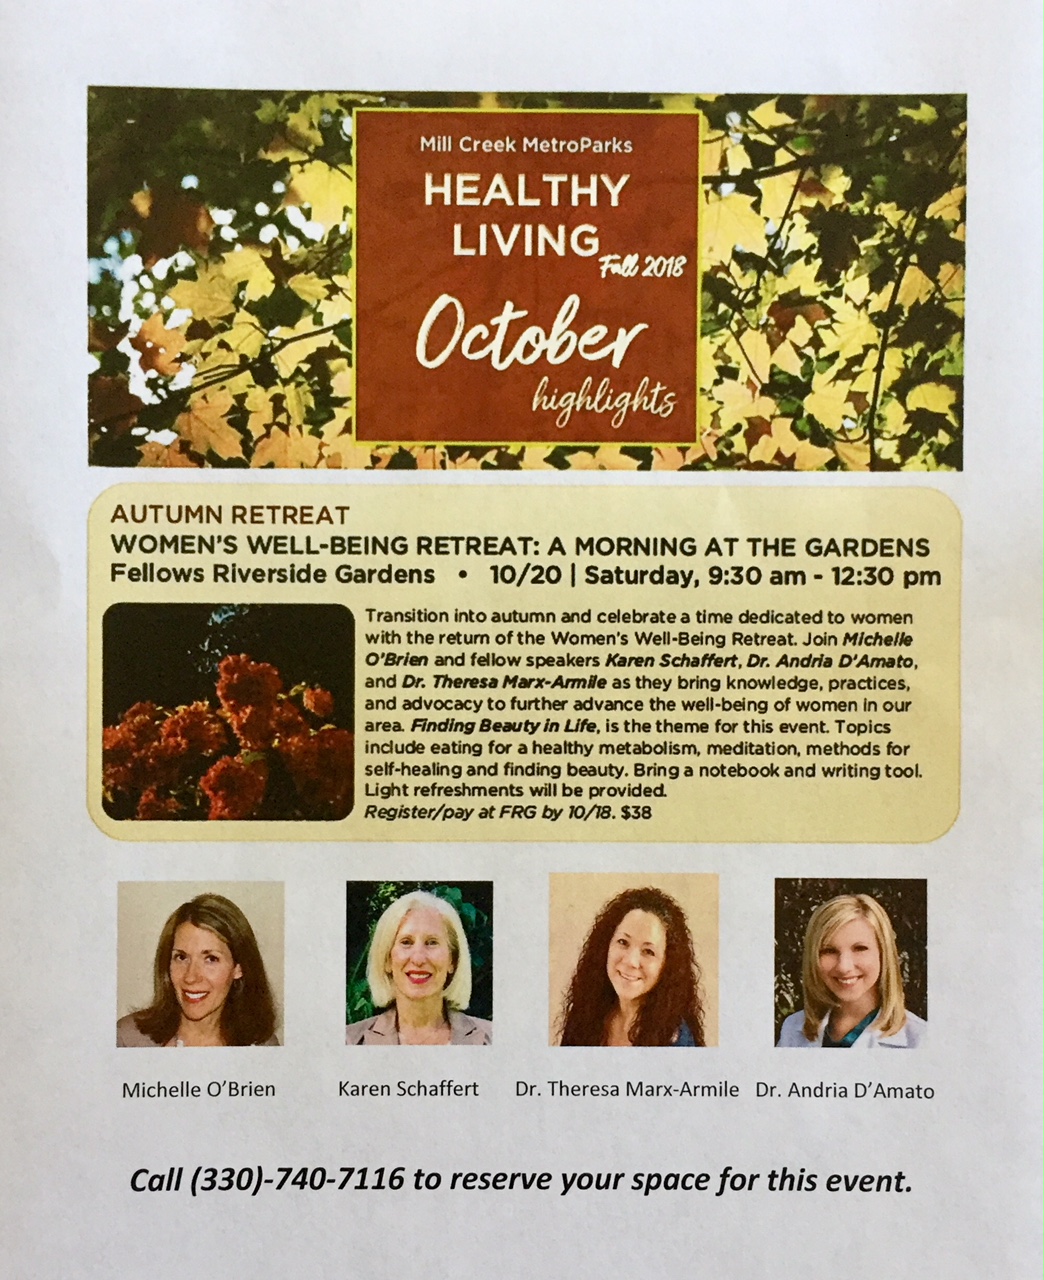 Flyer for Women's Well-Being Retreat in Mill Creek Park